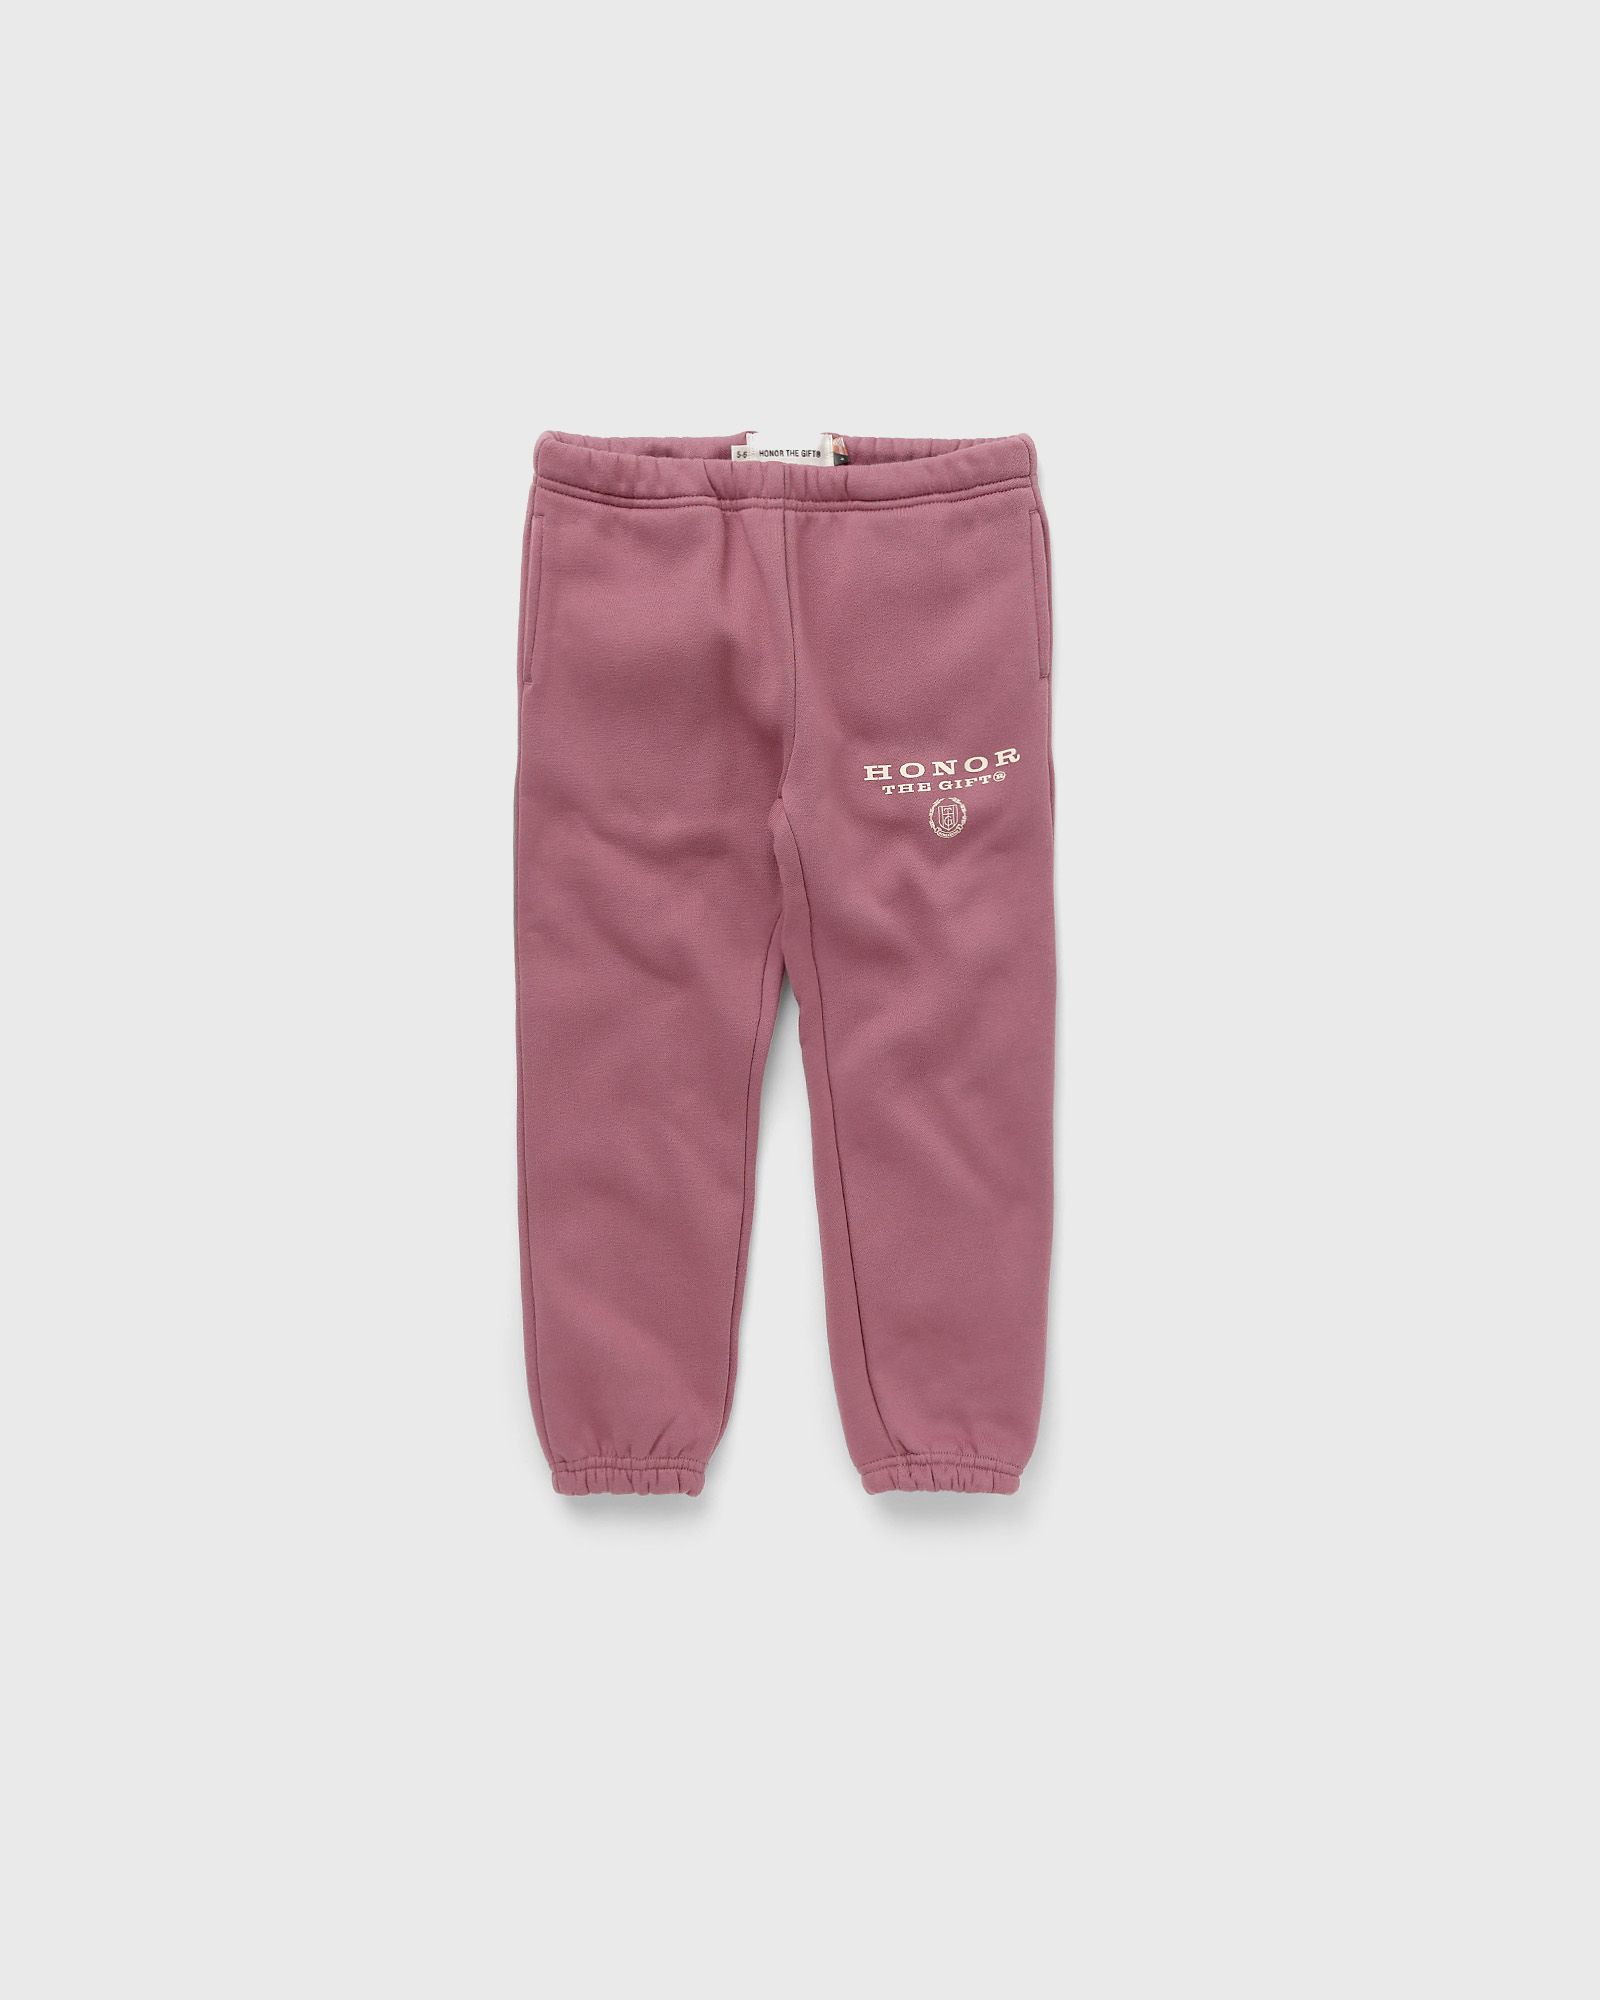 Honor The Gift - sweatpant  pants pink in größe:age 2-4 | eu 92-104